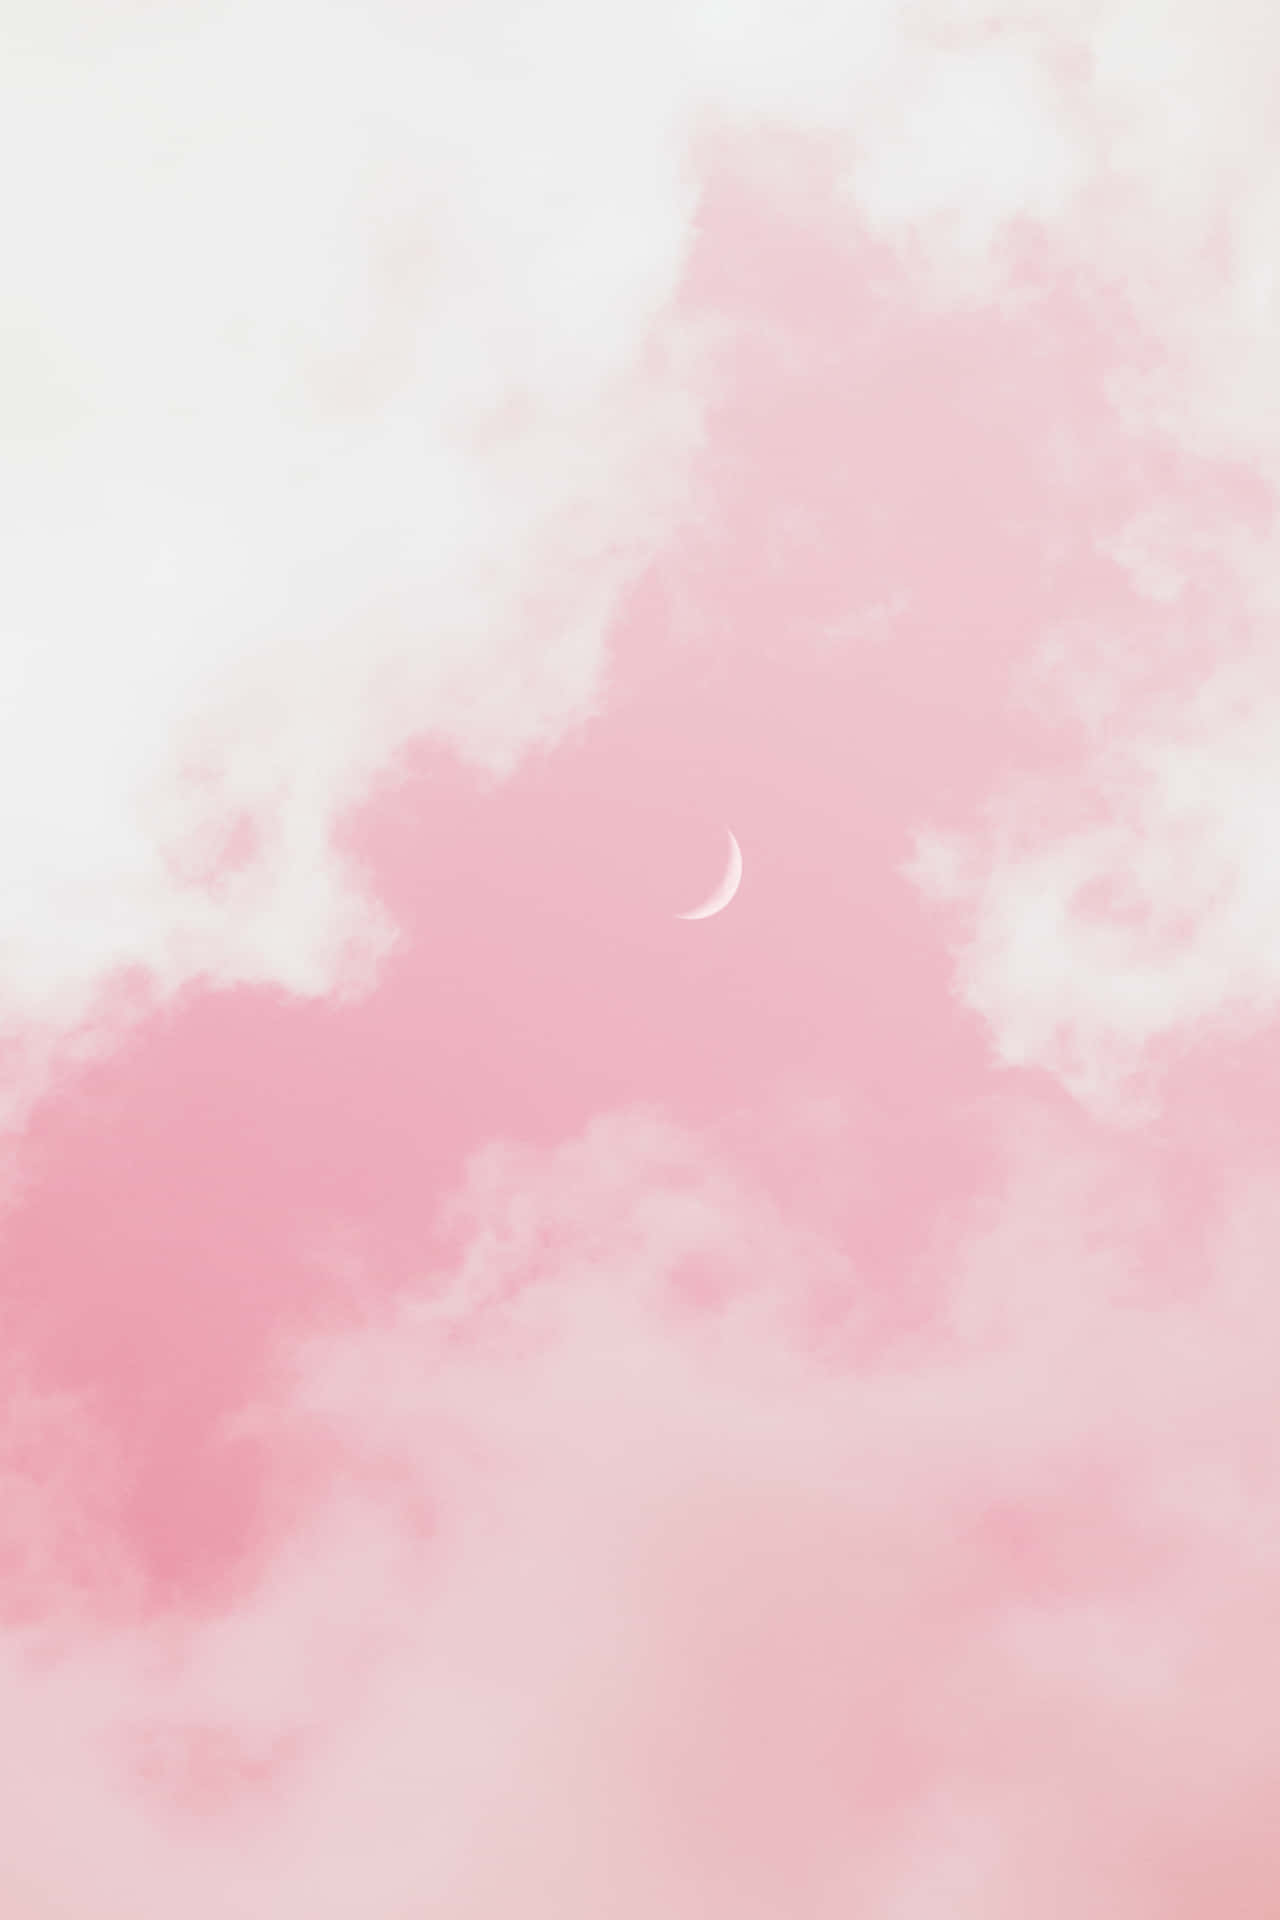 Crescent Moon Pink Aesthetic Background